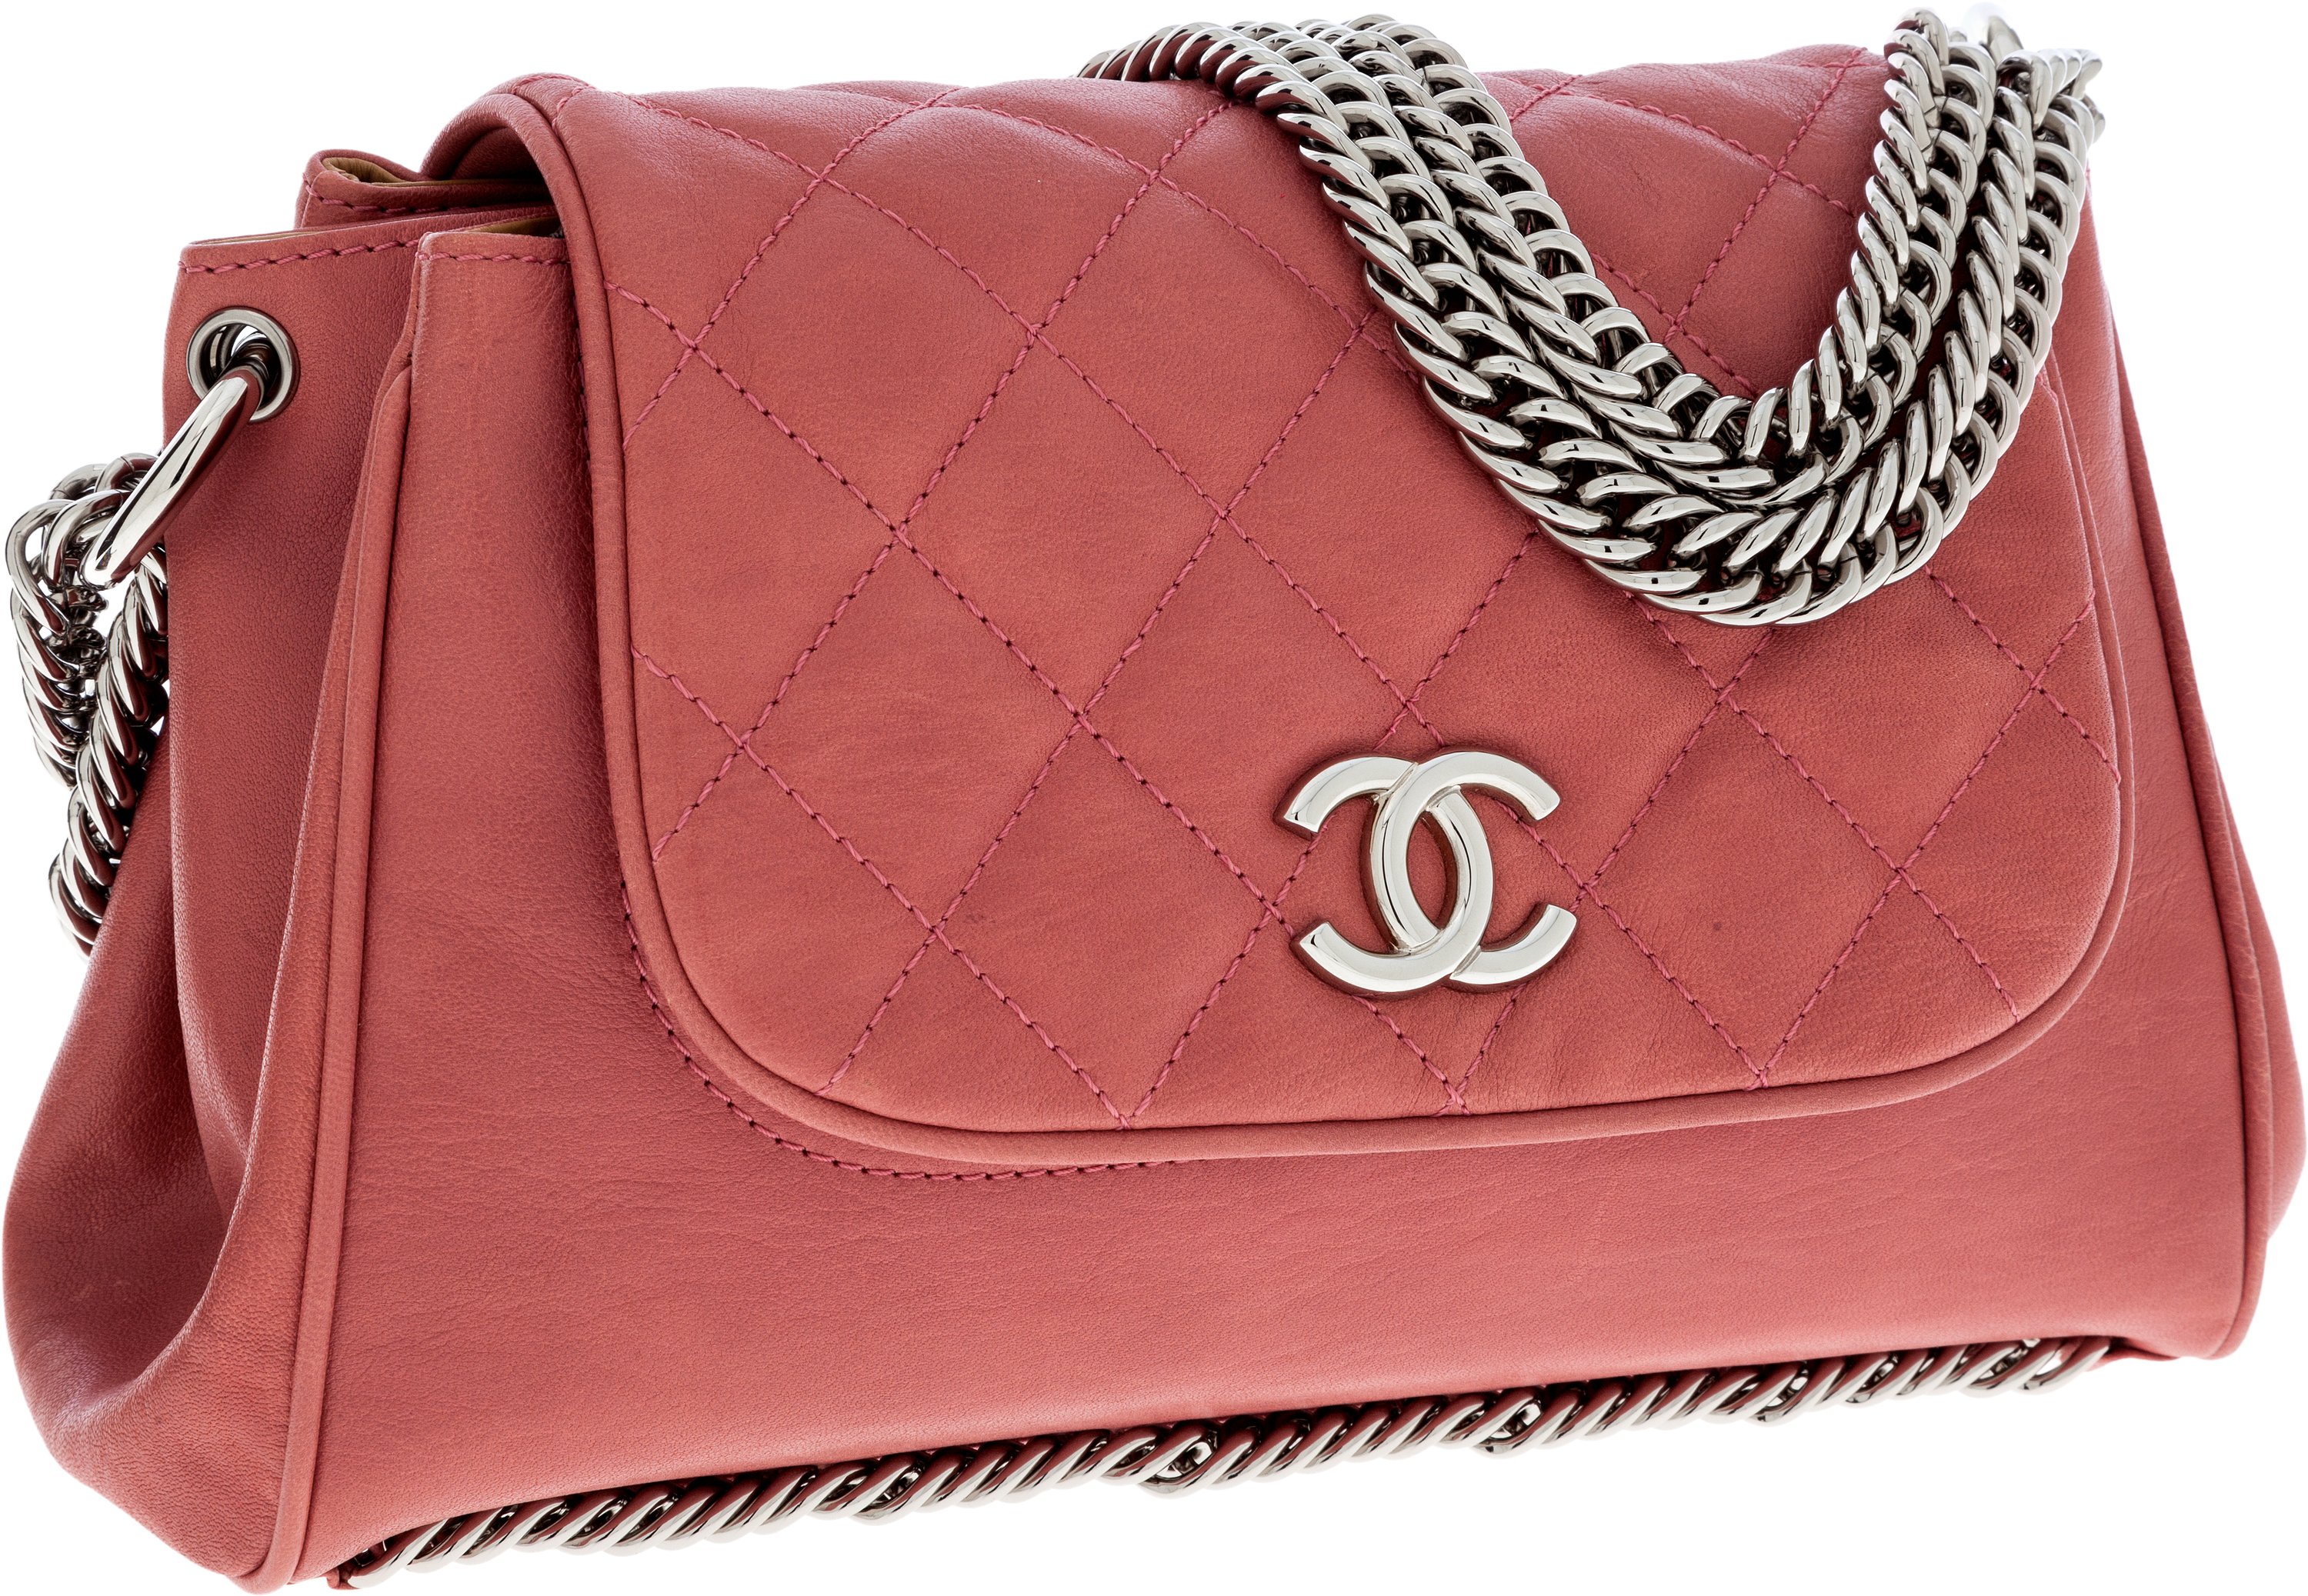 Chanel Dusty Rose Pink Lambskin Leather Chain Strap Flap Bag. , Lot  #64113